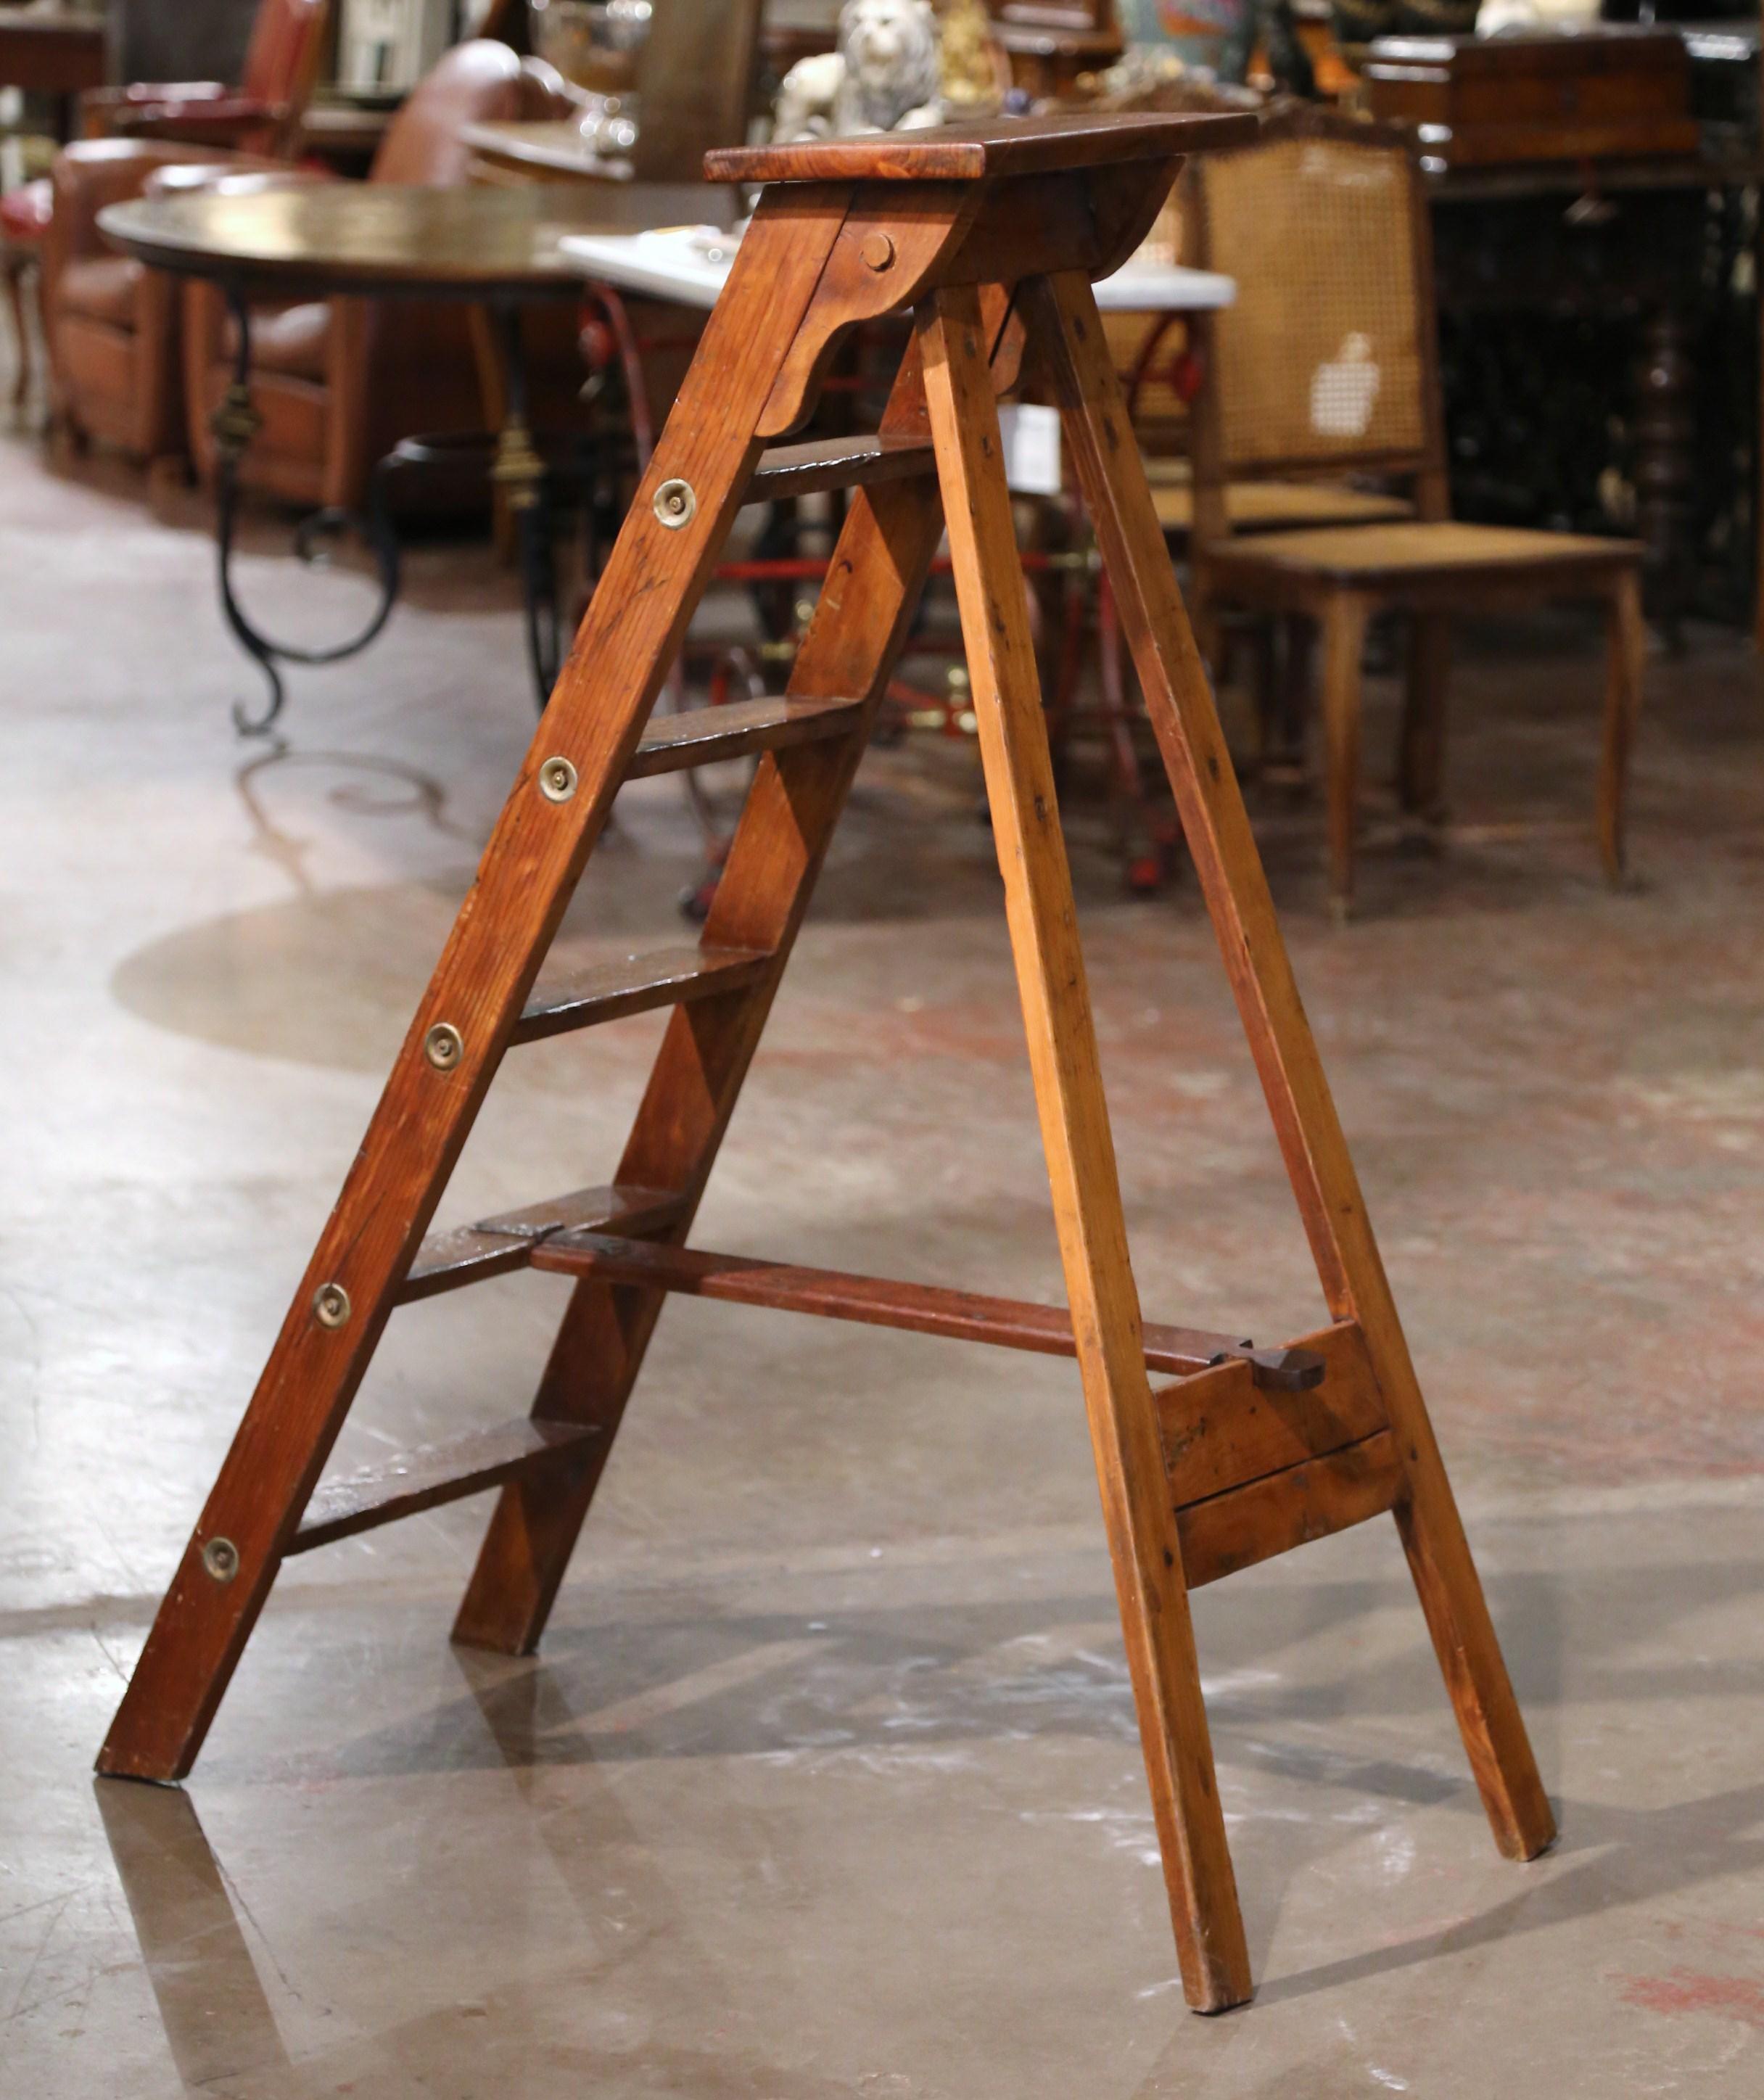 Decorate a study or a library with this whimsical antique ladder. Crafted in Lyon, France circa 1880 and made of pine, the sturdy step ladder features six steps including a wider and deeper step at the top. Practical and useful, the rustic ladder